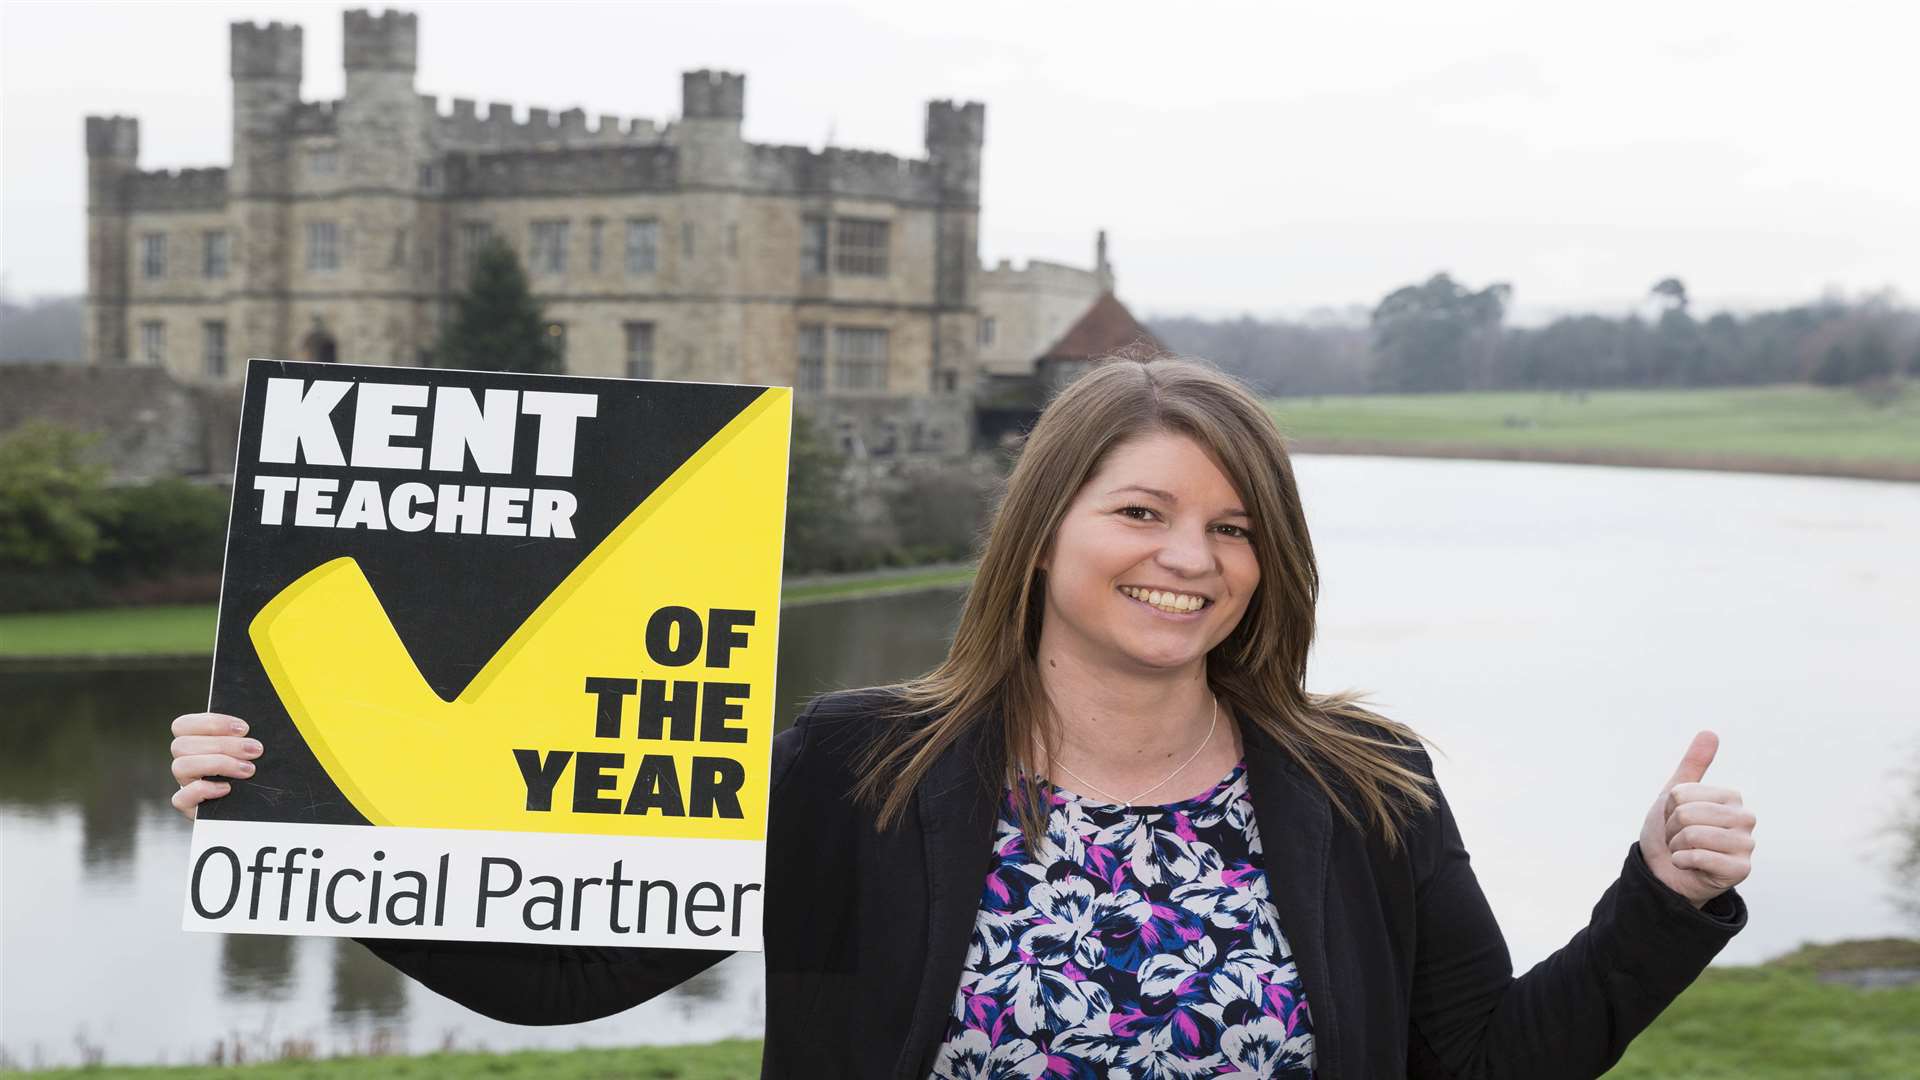 Carolyn Dool of Kent Sport and Physical Activity Service is supporting the sports category for the Kent Teacher of the Year Awards 2016.